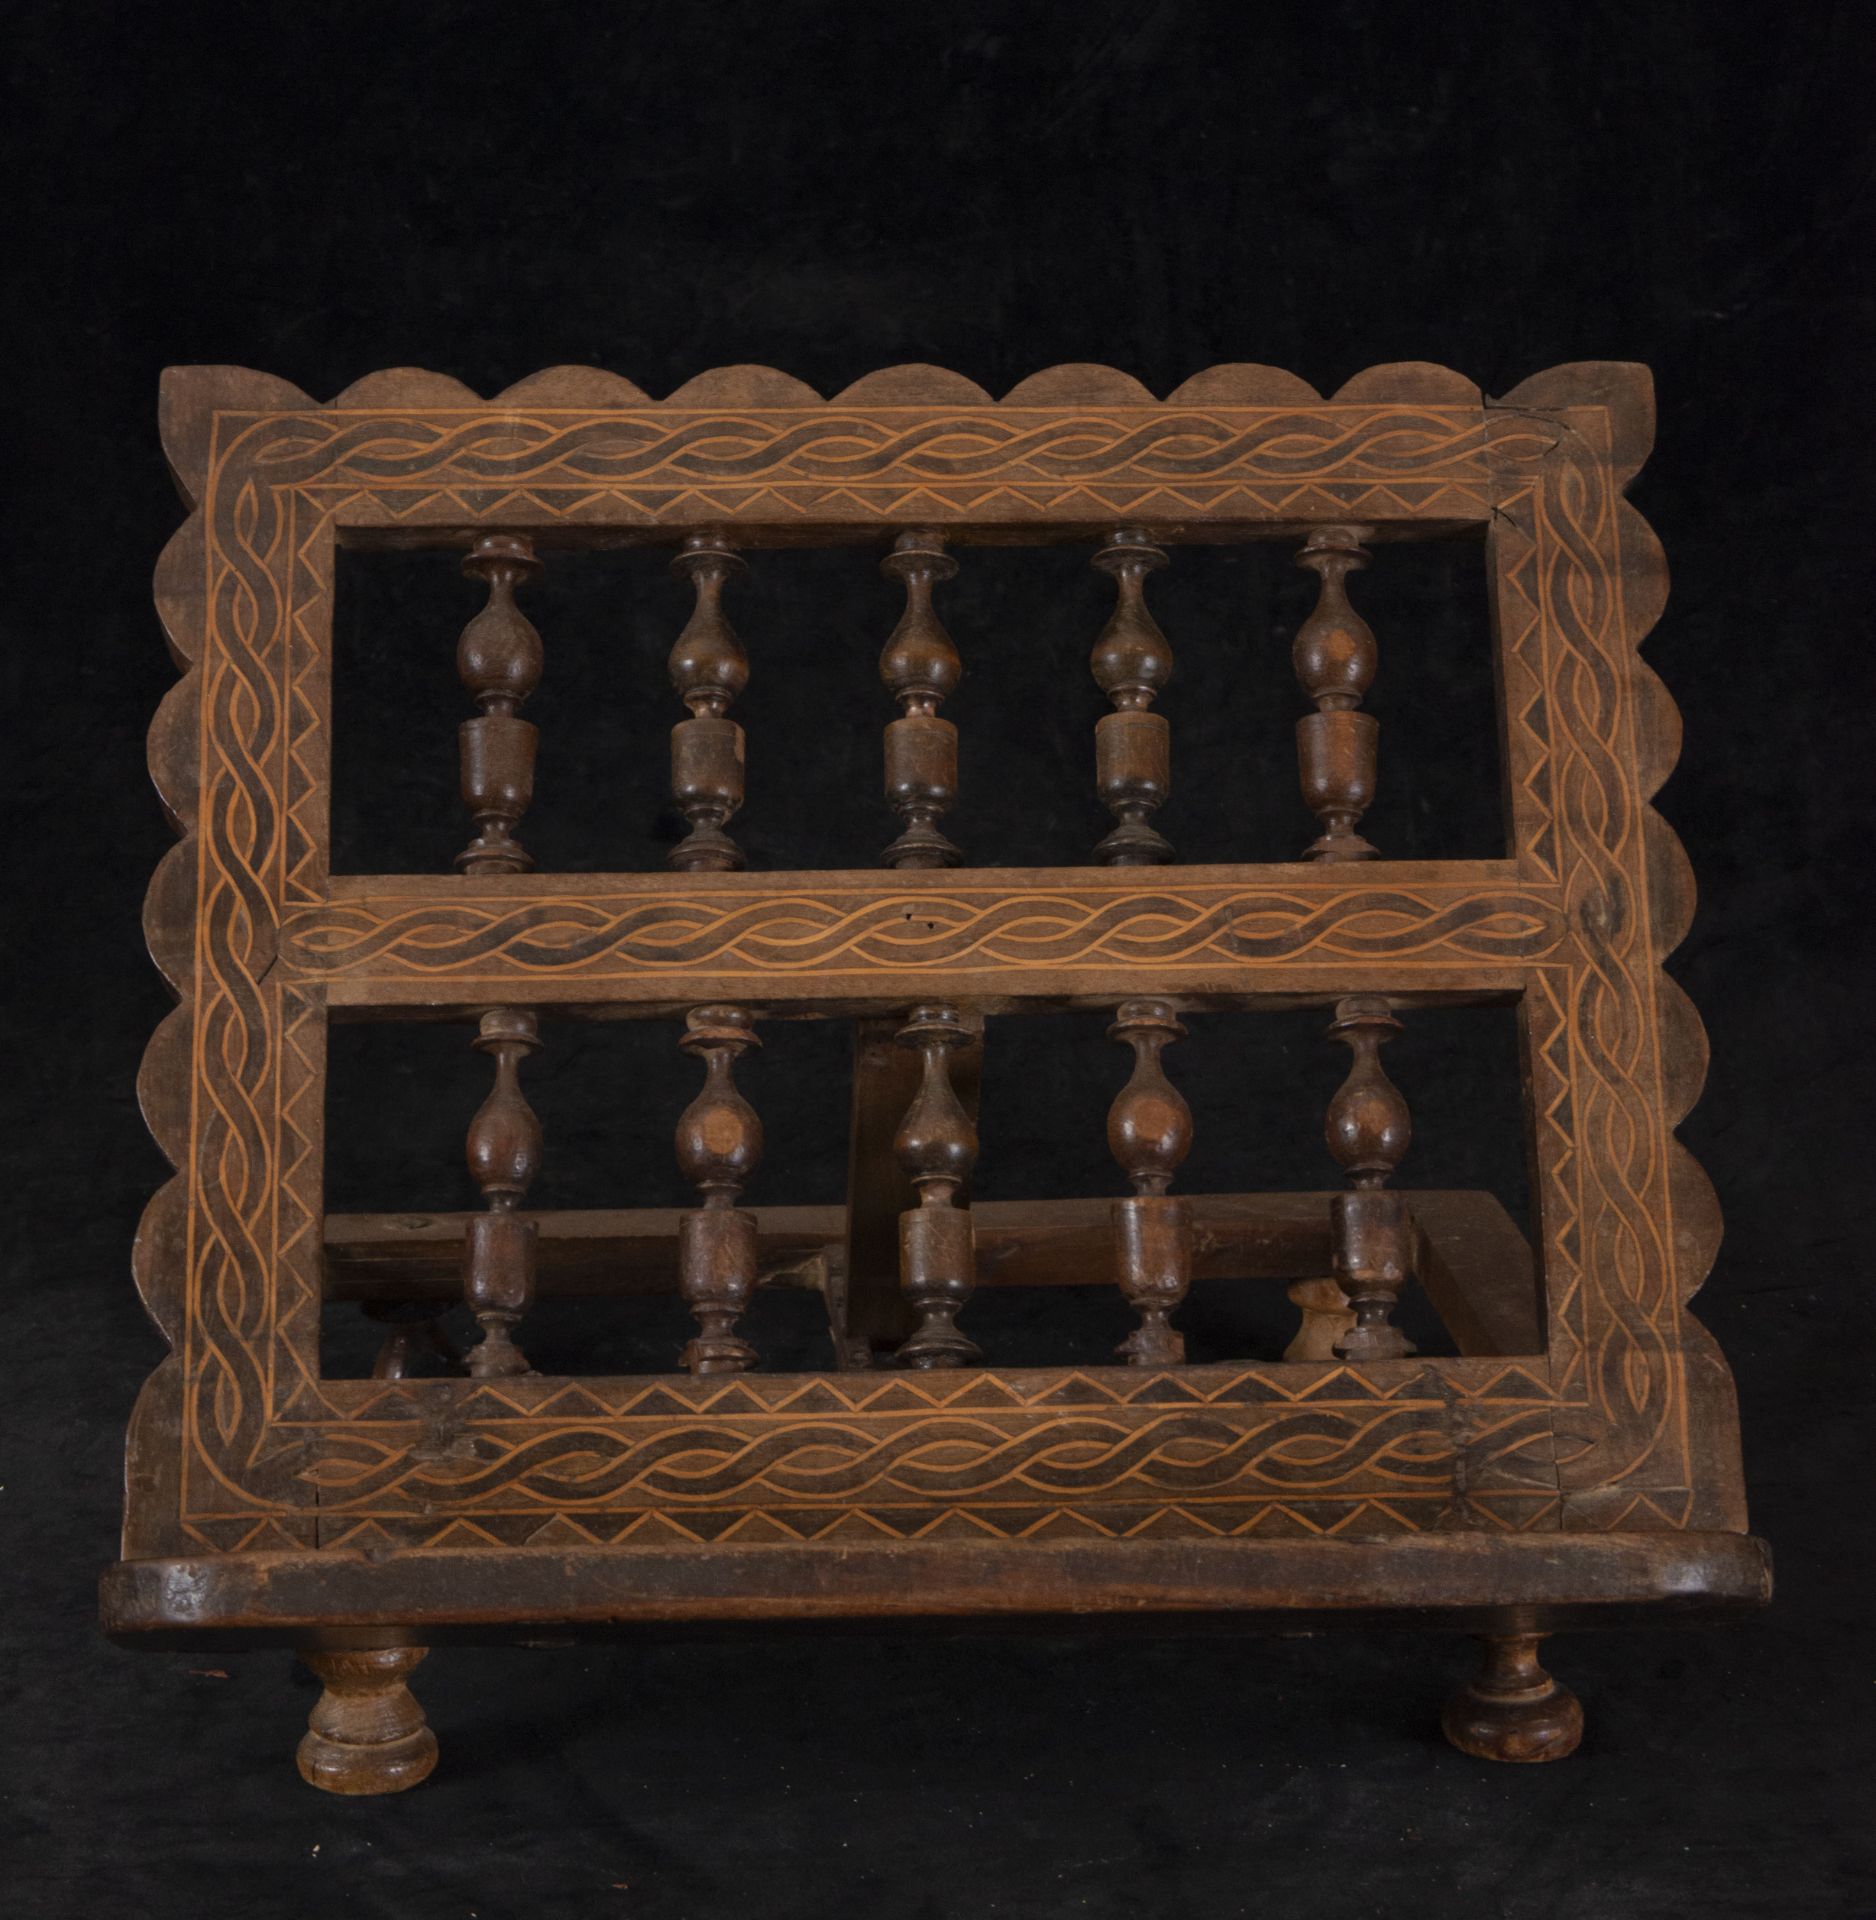 New Spanish colonial lectern in fruit and tropical wood marquetry, colonial work from the Viceroyalt